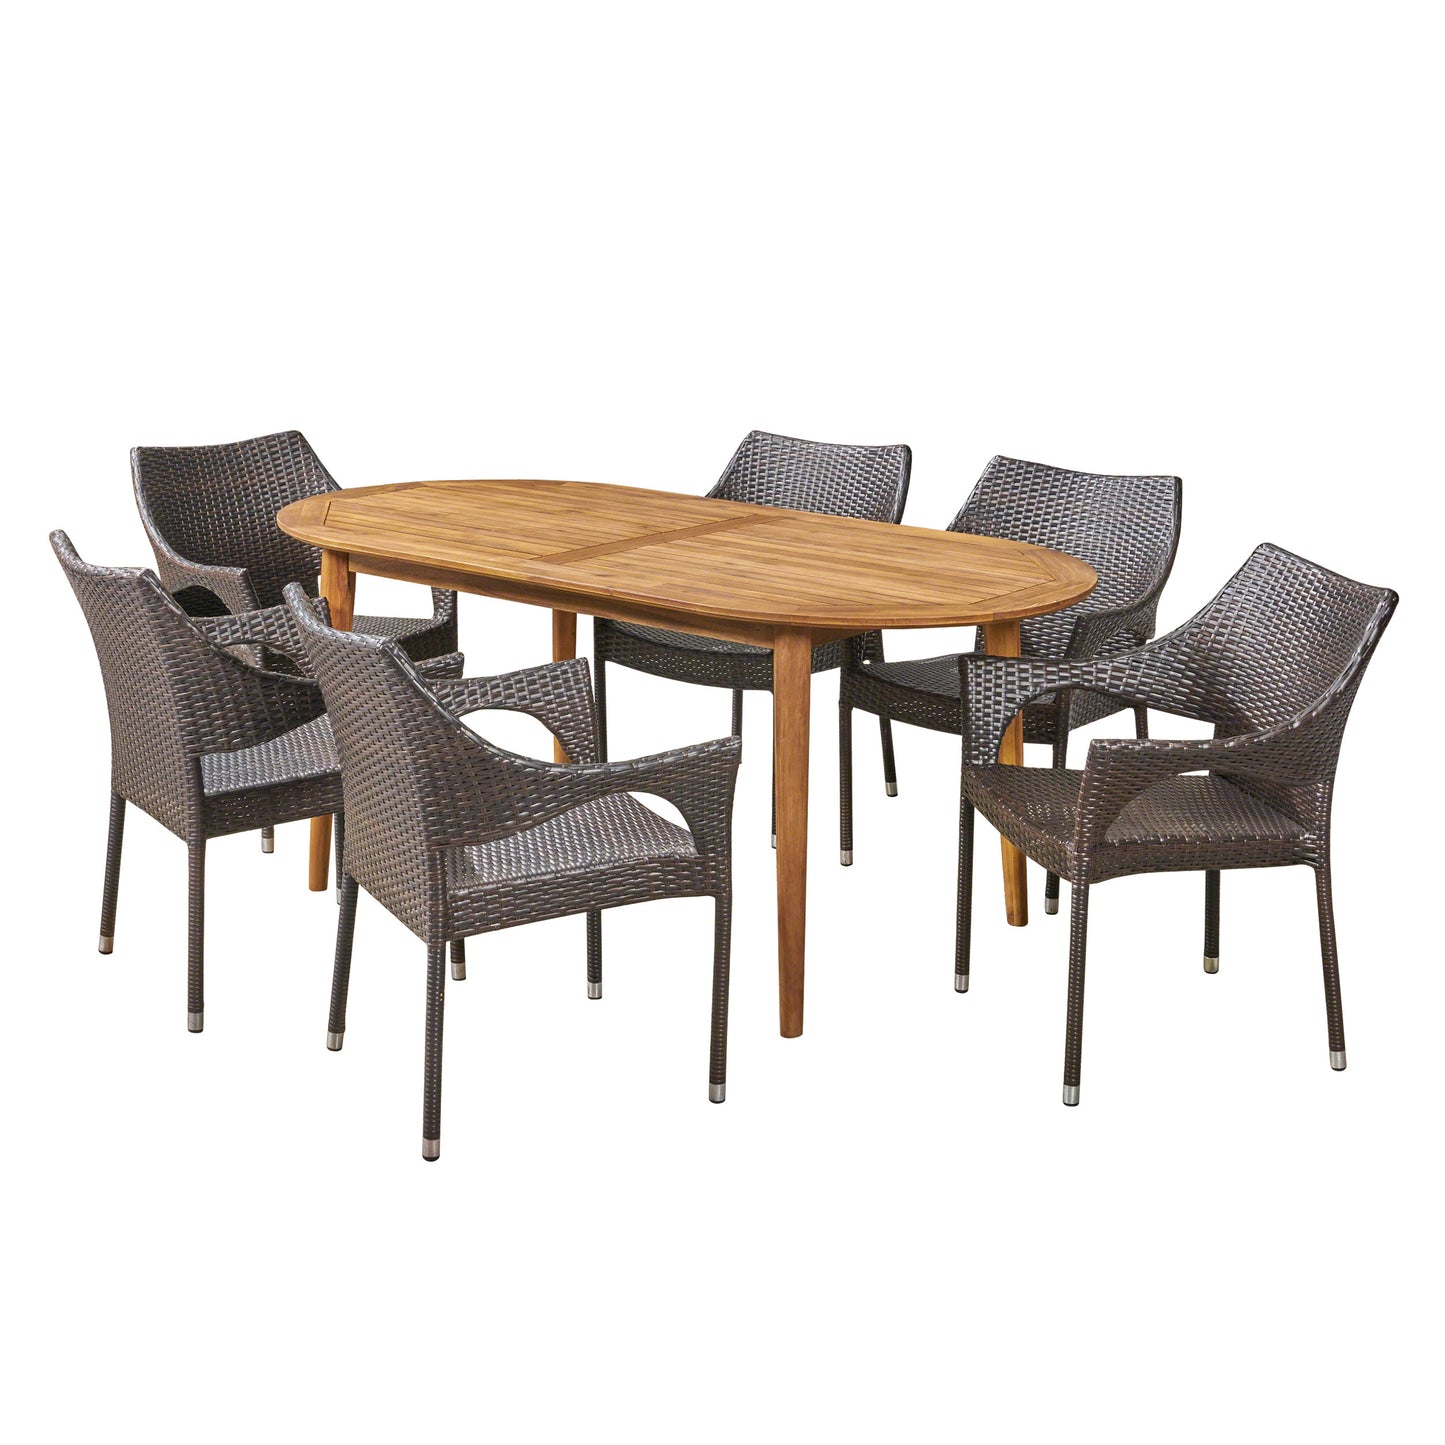 Fox Outdoor 7 Piece Acacia Wood Dining Set with Stacking Wicker Chairs